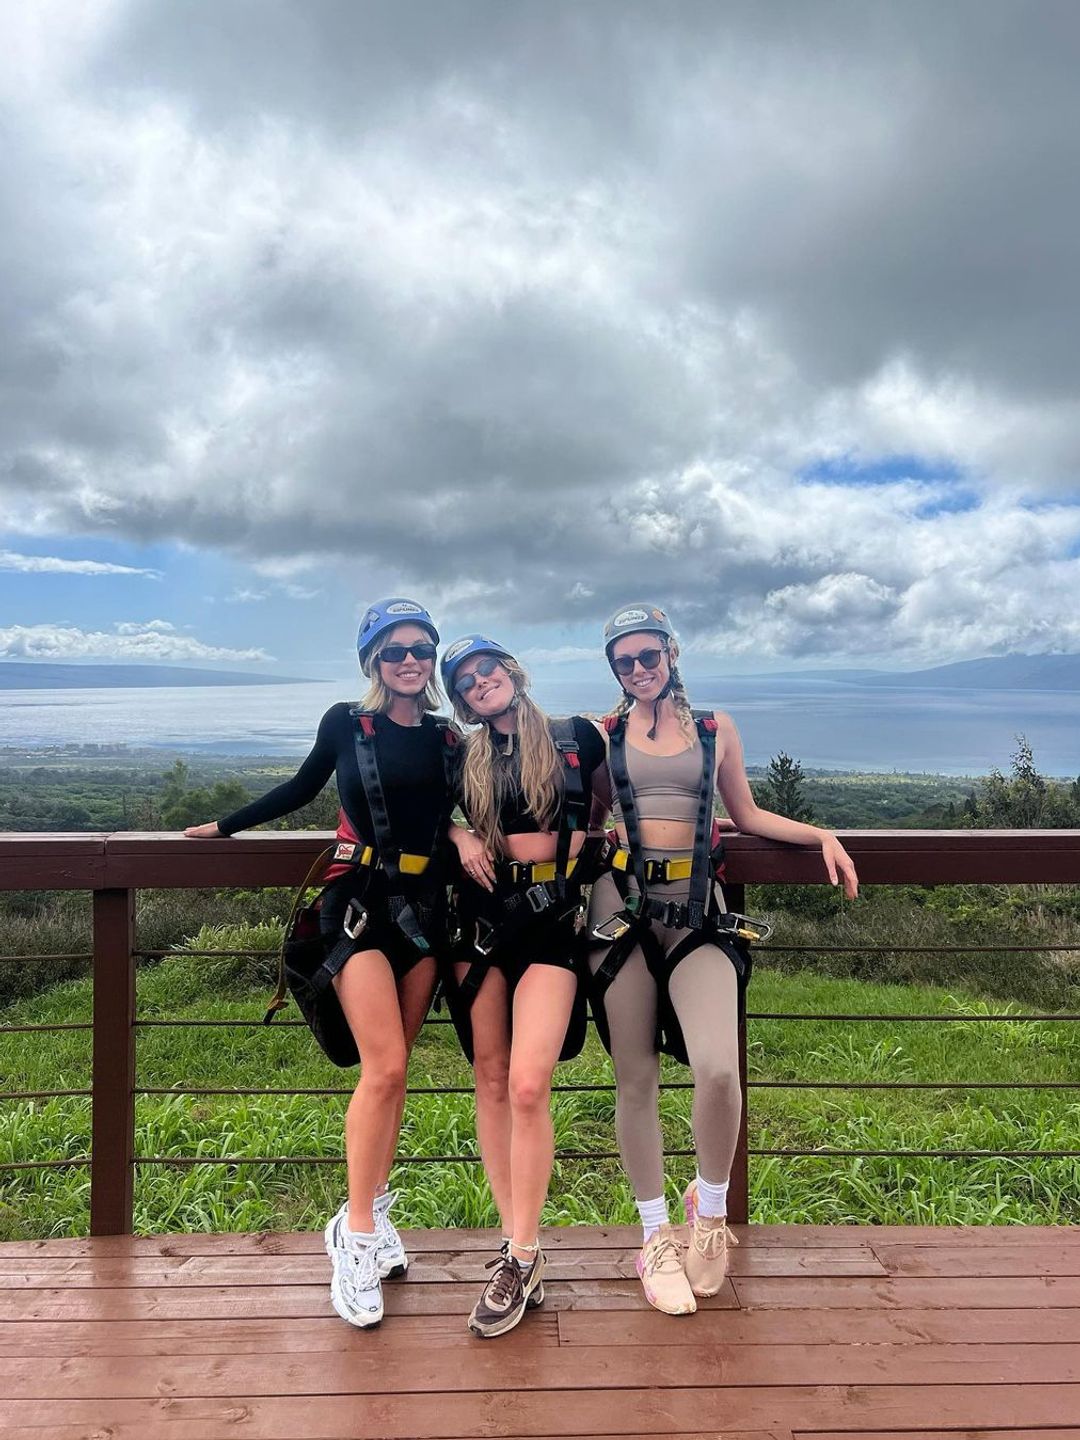 Sydney Sweeney wearing a harness with her friends 